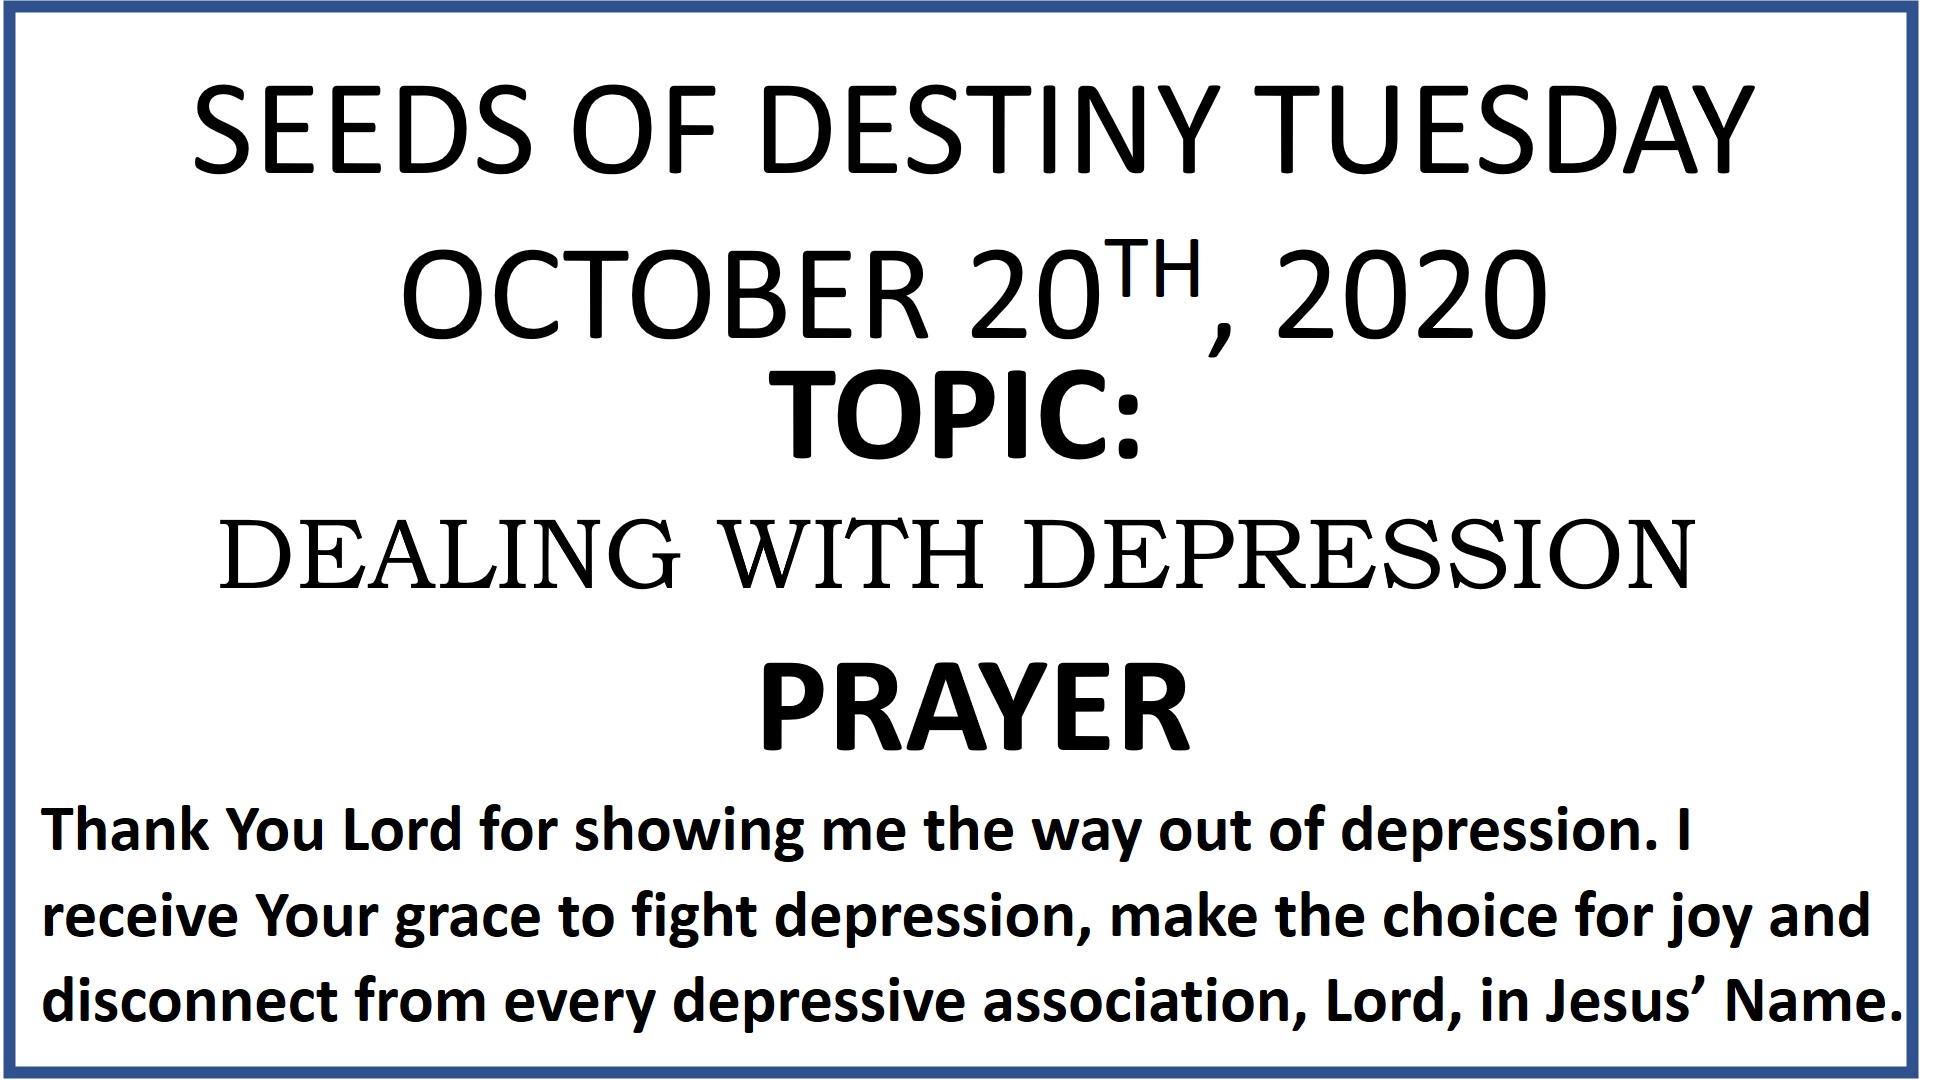 Seeds of Destiny Tuesday 20th October 2020 by Dr Paul Enenche